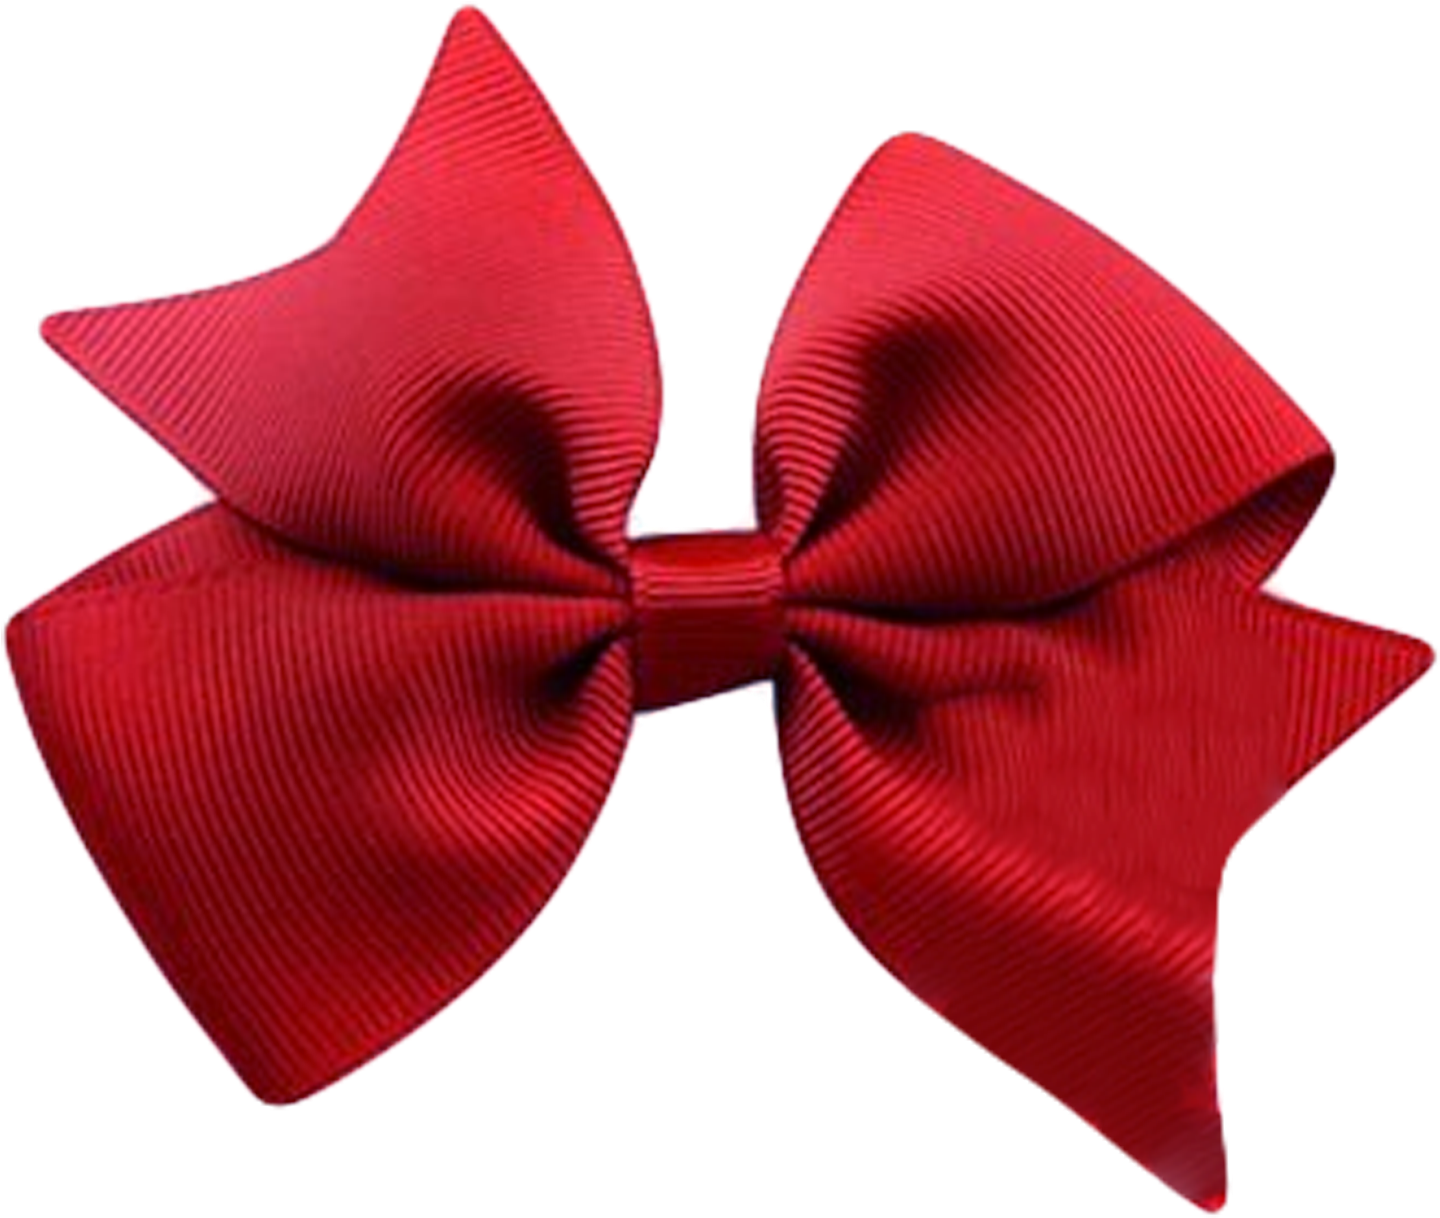 Virkotiered Hair Bow @virkotie Www - Isabellascloset2012 2pc Matching Boutique Bow Set (1600x1600)